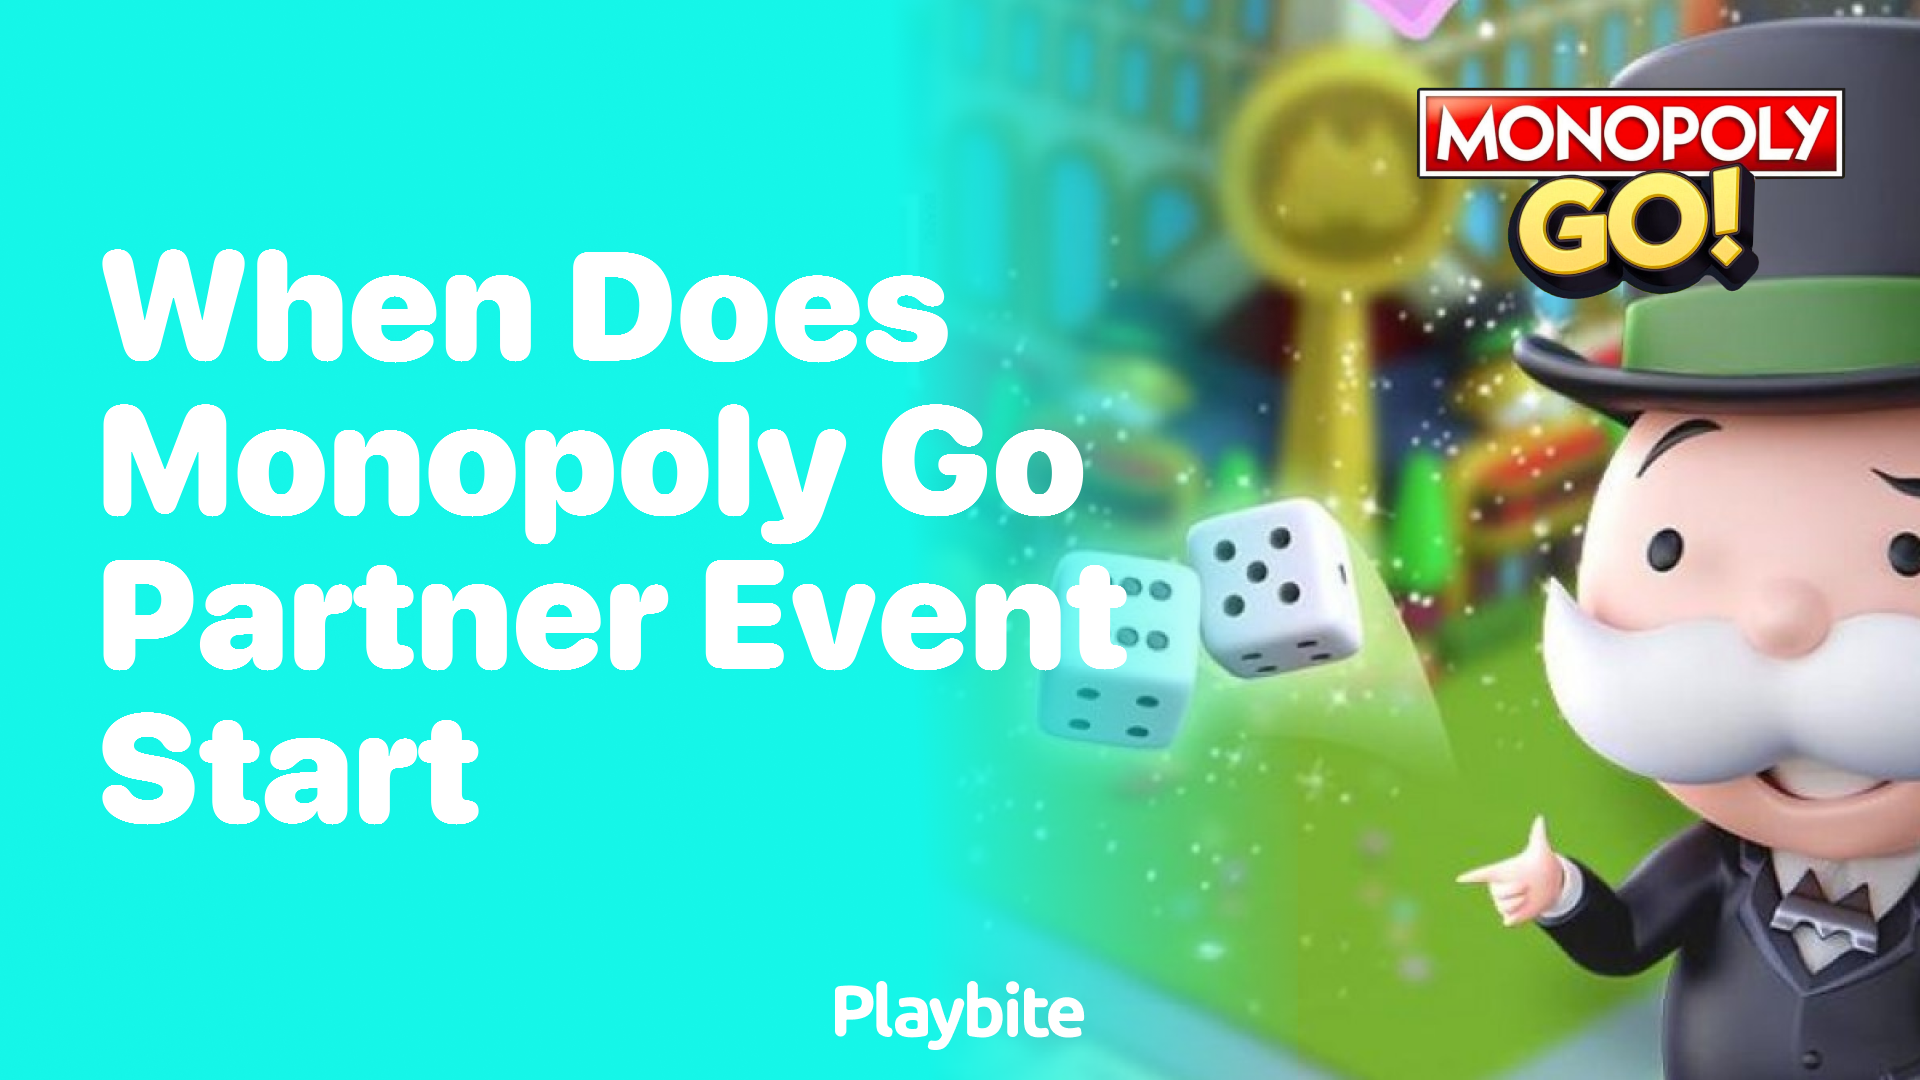 When Does the Monopoly Go Partner Event Start?